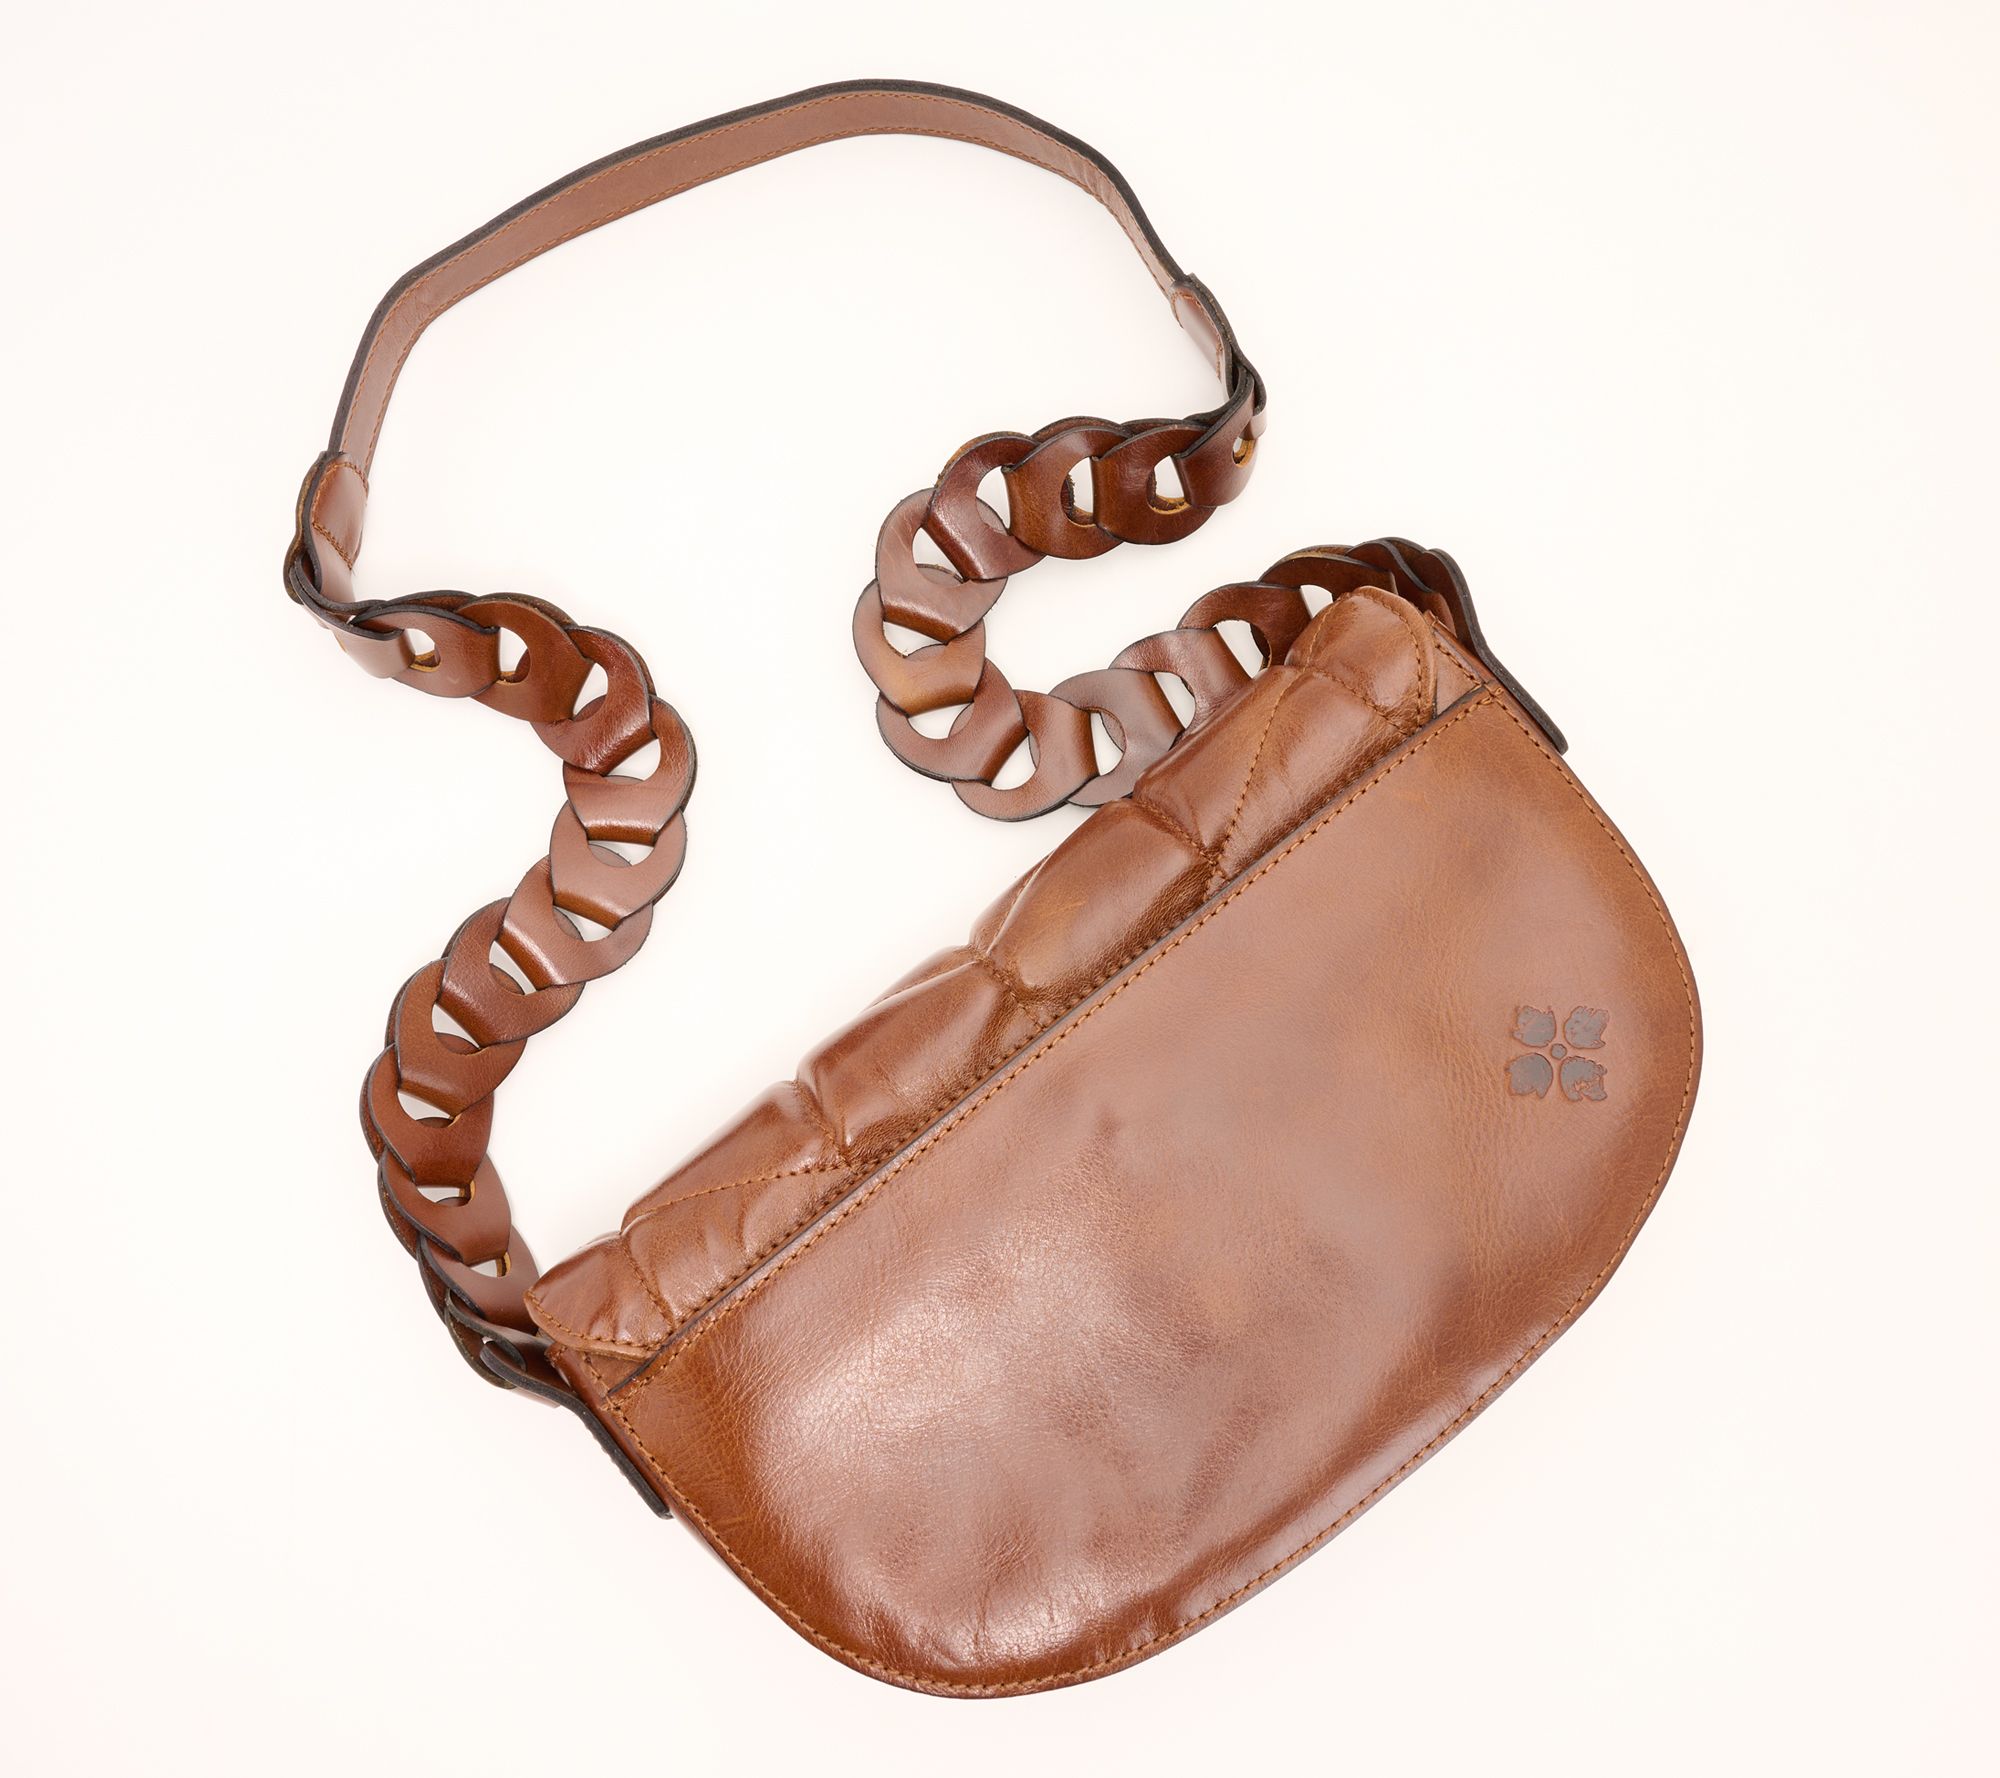 The Row Small Everyday Shoulder Bag in Dusty Green